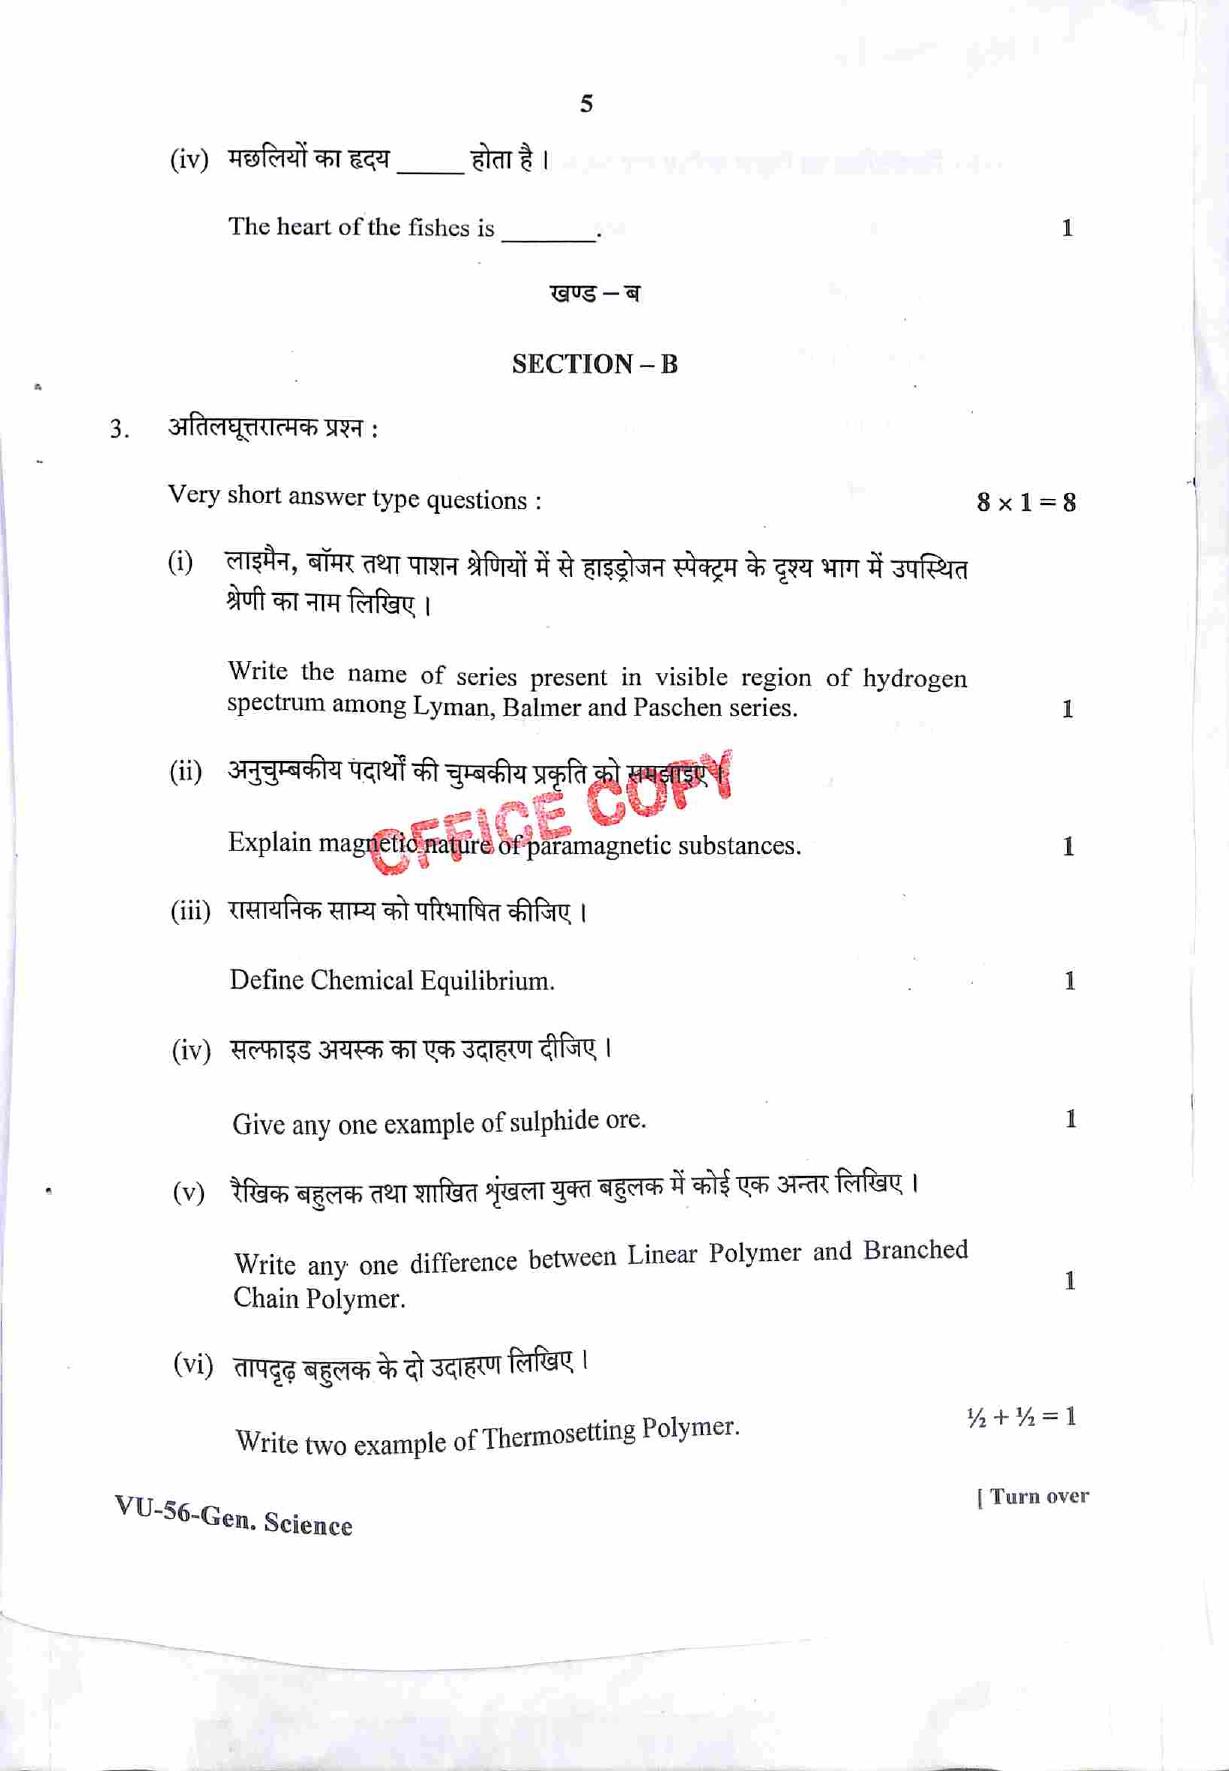 RBSE 2022 General Science Upadhyay Question Paper - Page 6